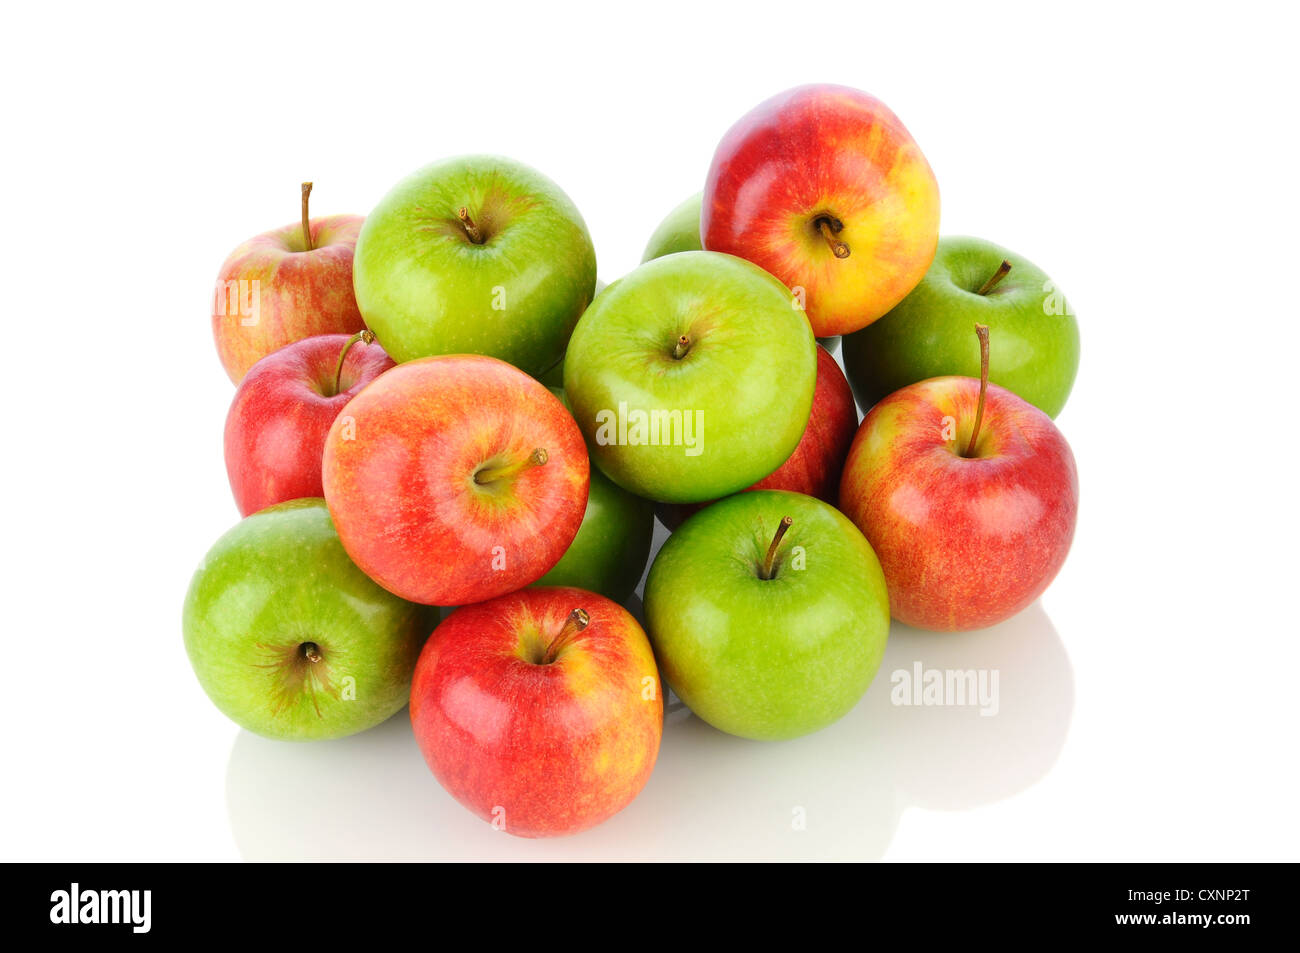 A pile of Gale and Granny Smith Apples on white with reflection. Horizontal format. Stock Photo